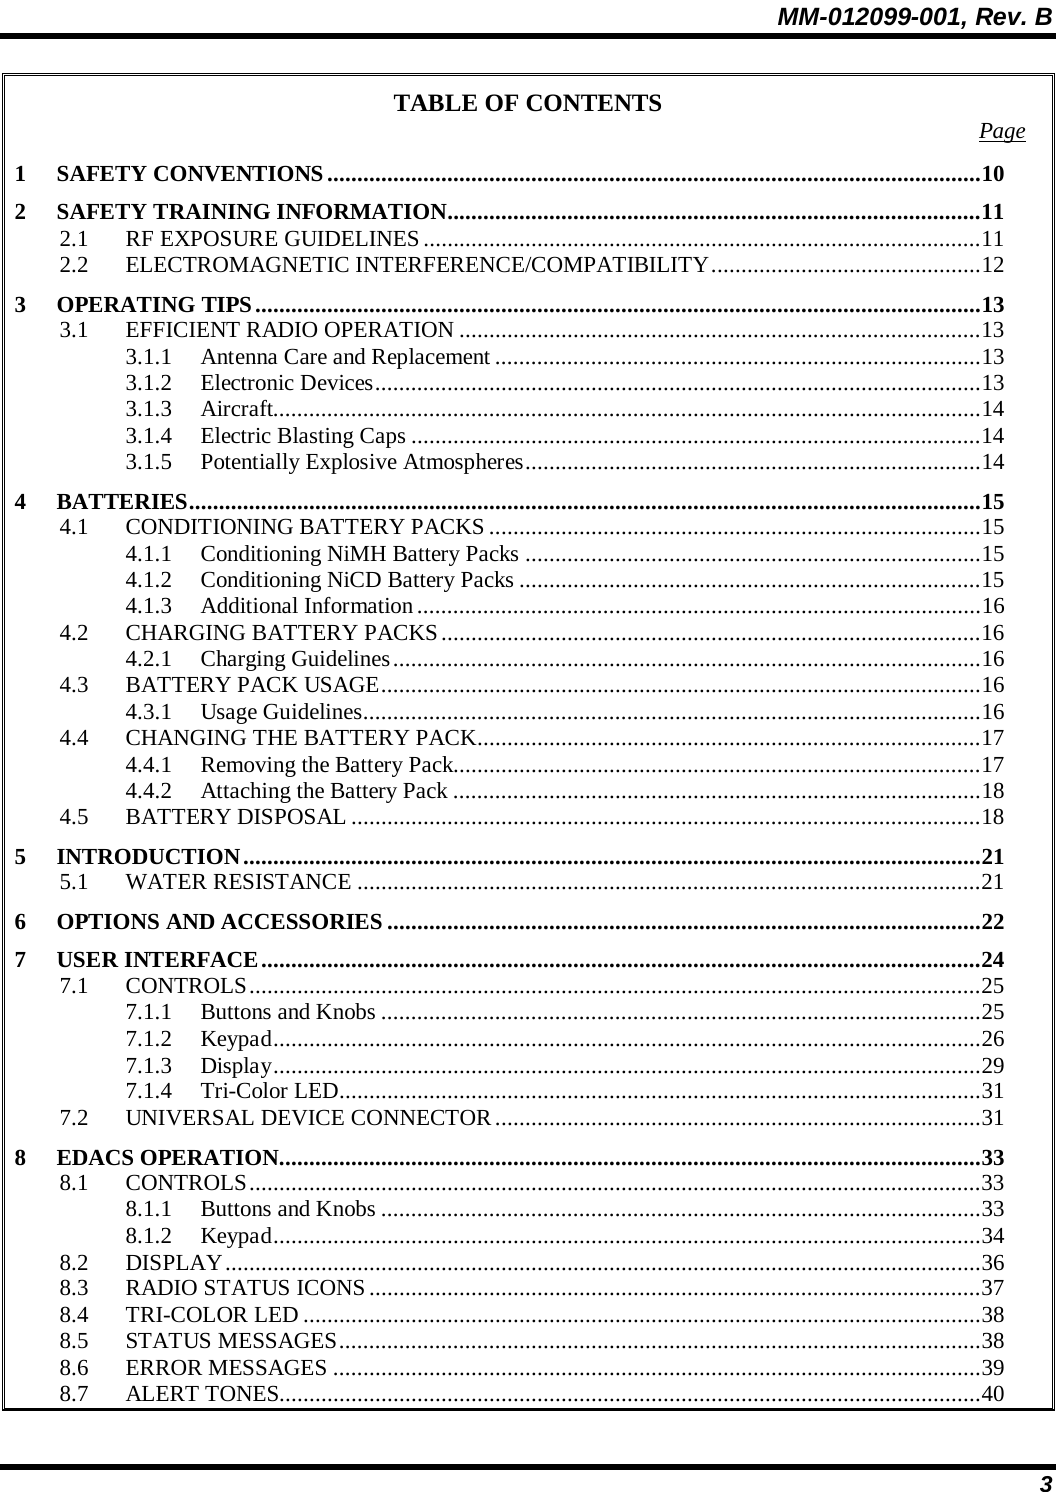 MM-012099-001, Rev. B 3 TABLE OF CONTENTS  Page 1 SAFETY CONVENTIONS .............................................................................................................10 2 SAFETY TRAINING INFORMATION.........................................................................................11 2.1 RF EXPOSURE GUIDELINES.............................................................................................11 2.2 ELECTROMAGNETIC INTERFERENCE/COMPATIBILITY.............................................12 3 OPERATING TIPS.........................................................................................................................13 3.1 EFFICIENT RADIO OPERATION .......................................................................................13 3.1.1 Antenna Care and Replacement .................................................................................13 3.1.2 Electronic Devices.....................................................................................................13 3.1.3 Aircraft......................................................................................................................14 3.1.4 Electric Blasting Caps ...............................................................................................14 3.1.5 Potentially Explosive Atmospheres............................................................................14 4 BATTERIES....................................................................................................................................15 4.1 CONDITIONING BATTERY PACKS ..................................................................................15 4.1.1 Conditioning NiMH Battery Packs ............................................................................15 4.1.2 Conditioning NiCD Battery Packs .............................................................................15 4.1.3 Additional Information..............................................................................................16 4.2 CHARGING BATTERY PACKS..........................................................................................16 4.2.1 Charging Guidelines..................................................................................................16 4.3 BATTERY PACK USAGE....................................................................................................16 4.3.1 Usage Guidelines.......................................................................................................16 4.4 CHANGING THE BATTERY PACK....................................................................................17 4.4.1 Removing the Battery Pack........................................................................................17 4.4.2 Attaching the Battery Pack ........................................................................................18 4.5 BATTERY DISPOSAL .........................................................................................................18 5 INTRODUCTION...........................................................................................................................21 5.1 WATER RESISTANCE ........................................................................................................21 6 OPTIONS AND ACCESSORIES ...................................................................................................22 7 USER INTERFACE........................................................................................................................24 7.1 CONTROLS..........................................................................................................................25 7.1.1 Buttons and Knobs ....................................................................................................25 7.1.2 Keypad......................................................................................................................26 7.1.3 Display......................................................................................................................29 7.1.4 Tri-Color LED...........................................................................................................31 7.2 UNIVERSAL DEVICE CONNECTOR.................................................................................31 8 EDACS OPERATION.....................................................................................................................33 8.1 CONTROLS..........................................................................................................................33 8.1.1 Buttons and Knobs ....................................................................................................33 8.1.2 Keypad......................................................................................................................34 8.2 DISPLAY..............................................................................................................................36 8.3 RADIO STATUS ICONS......................................................................................................37 8.4 TRI-COLOR LED .................................................................................................................38 8.5 STATUS MESSAGES...........................................................................................................38 8.6 ERROR MESSAGES ............................................................................................................39 8.7 ALERT TONES.....................................................................................................................40 